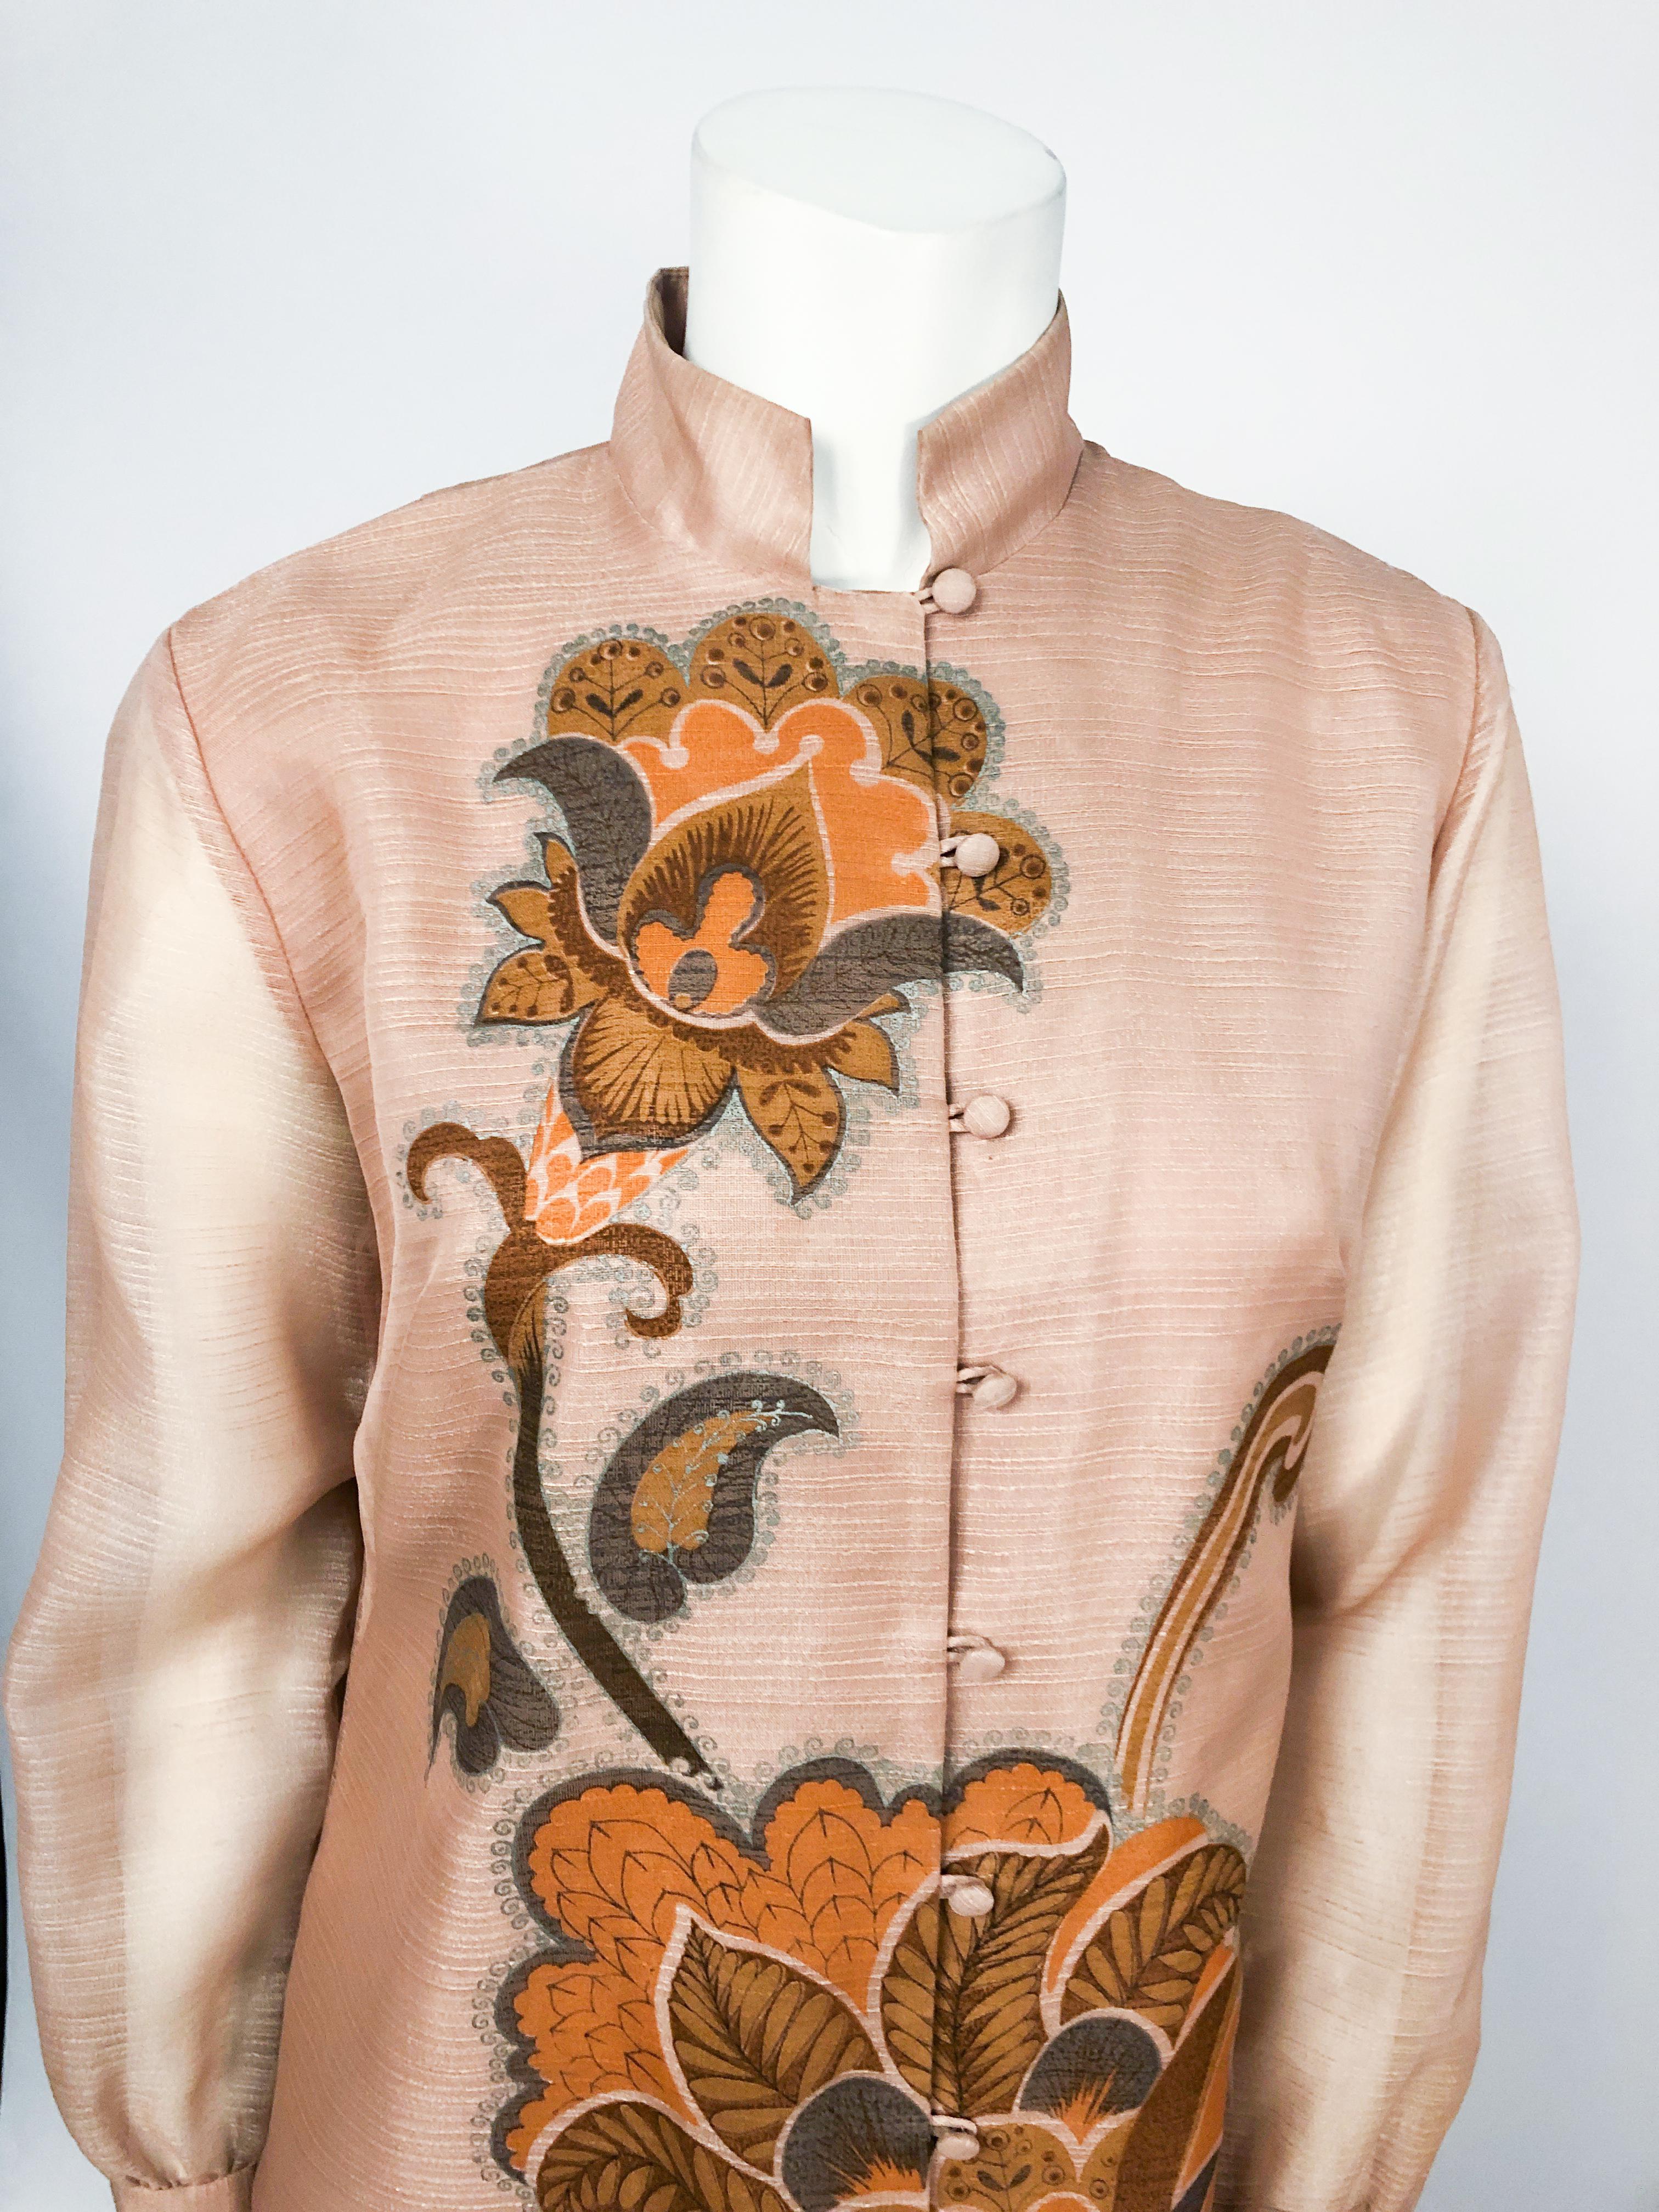 1970s Alfred Shaheen Tan Autumn Dress featuring a hand painted designs, nehru collar, unlined sleeves, cuffed sleeves, and drop waist.